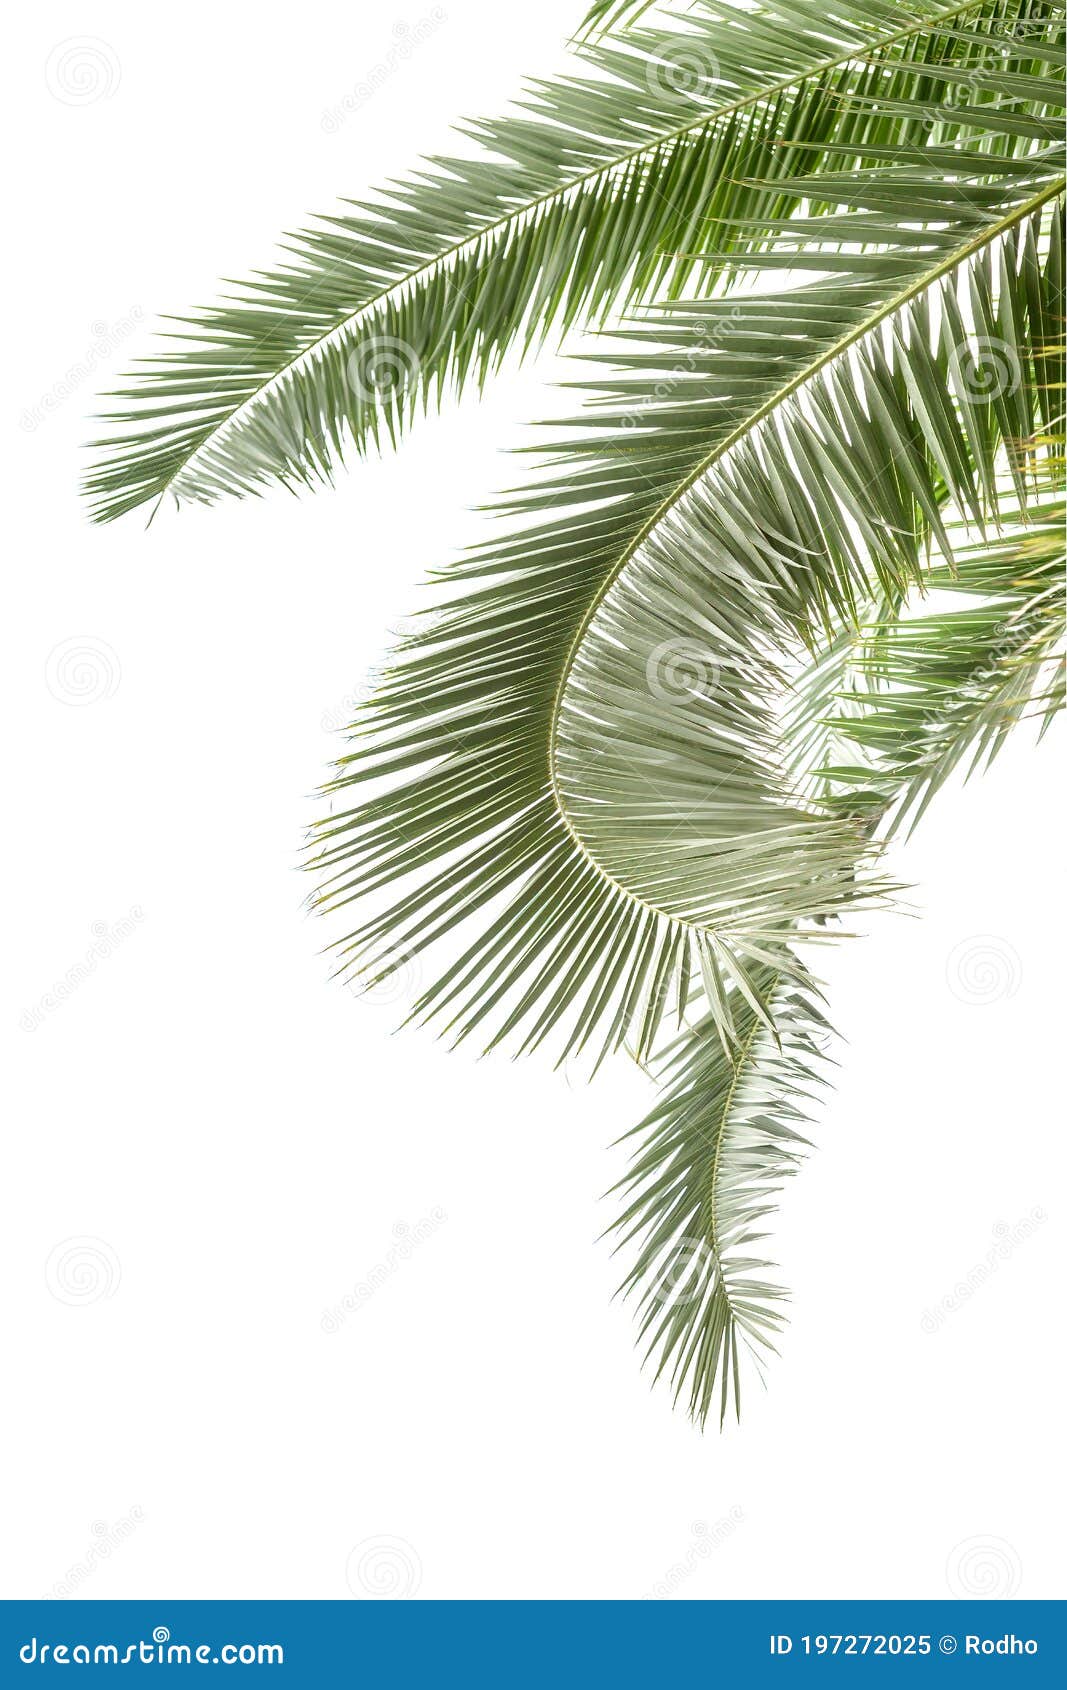 Hanging Palm Leaves Isolated on the White Background Stock Image